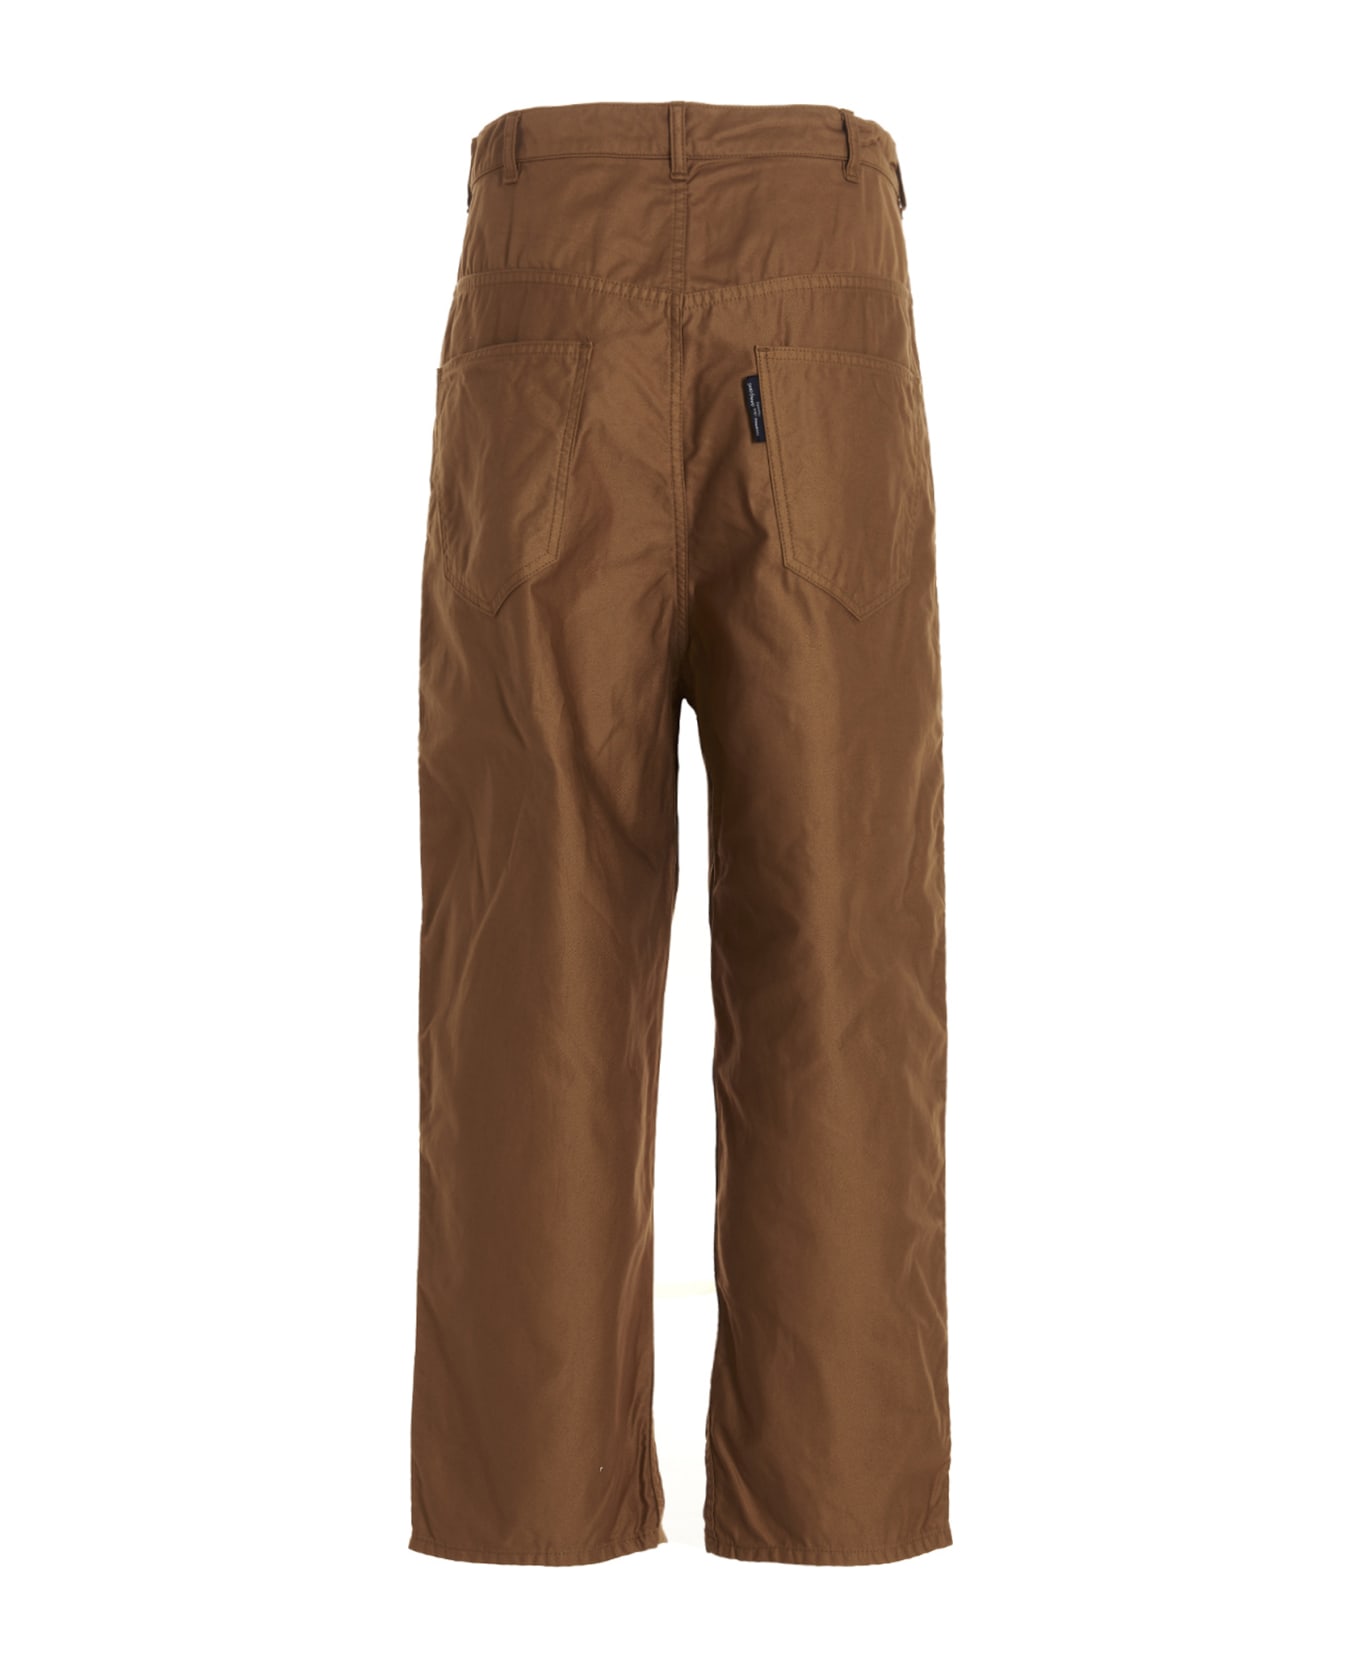 Comme des Garçons Homme Relaxed Chinos - Beige ボトムス